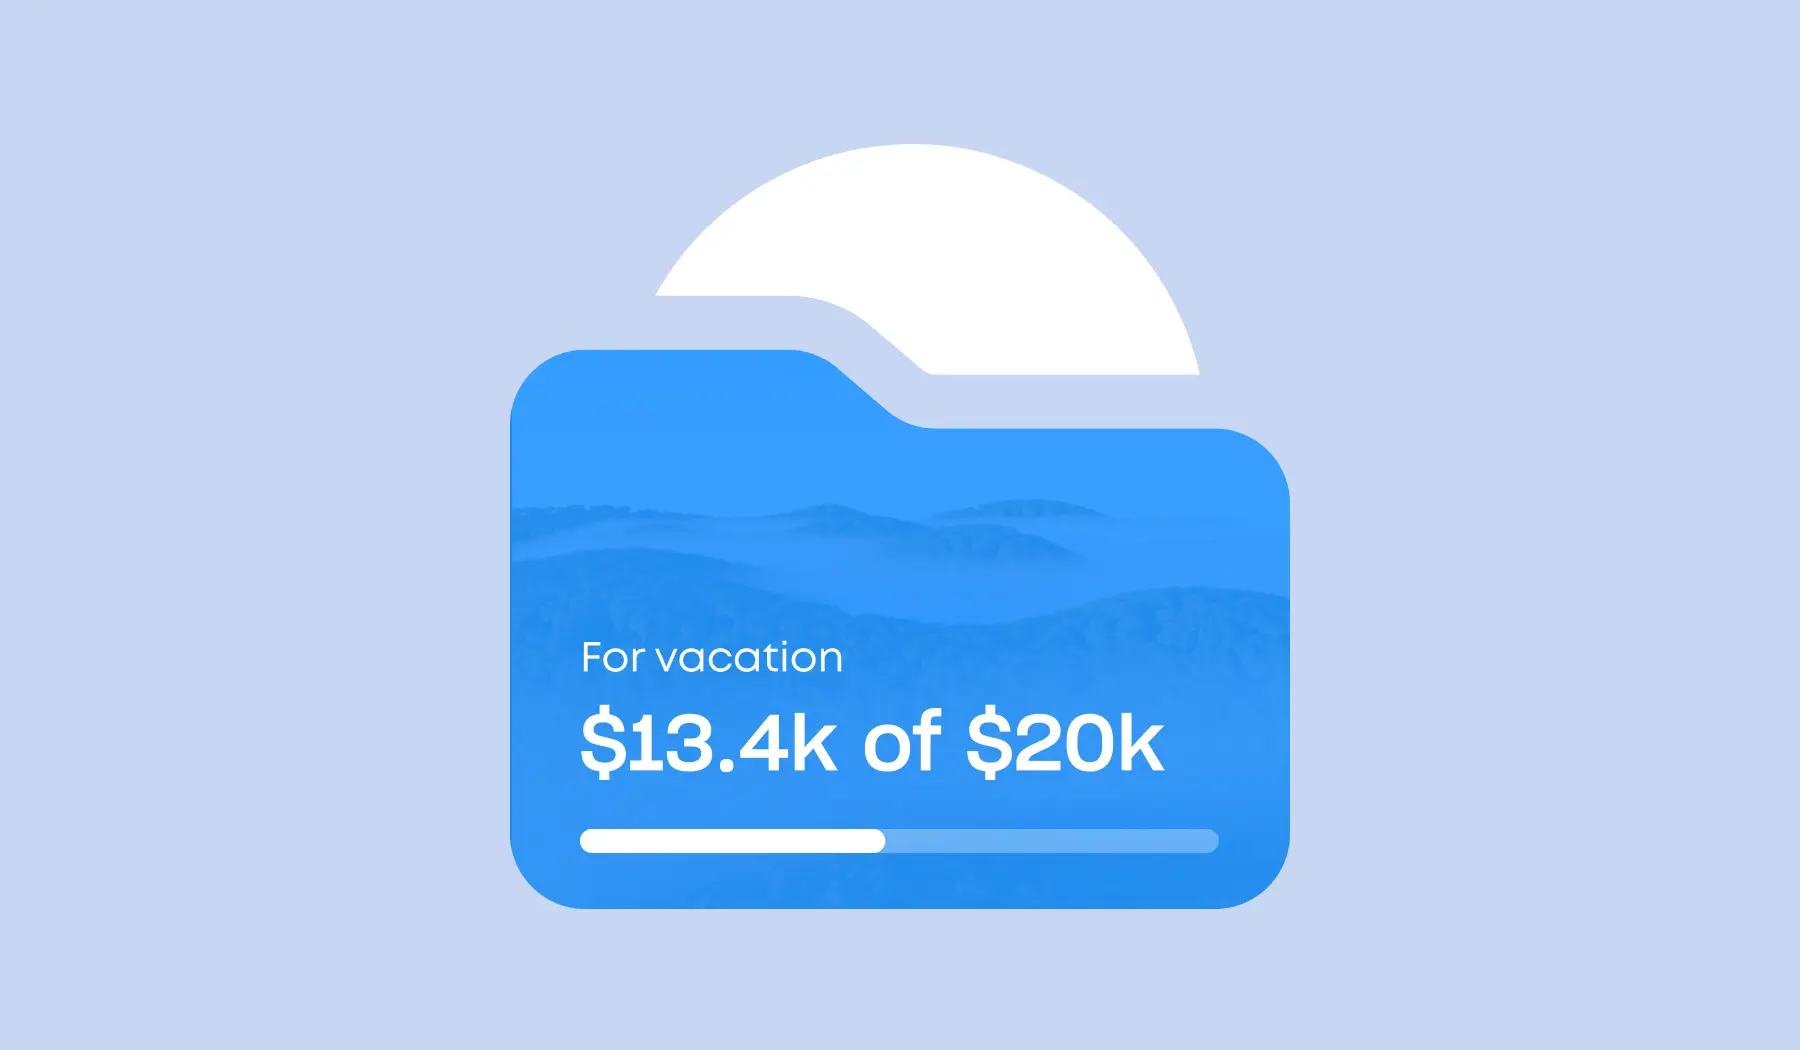 Virtual card for a vacation